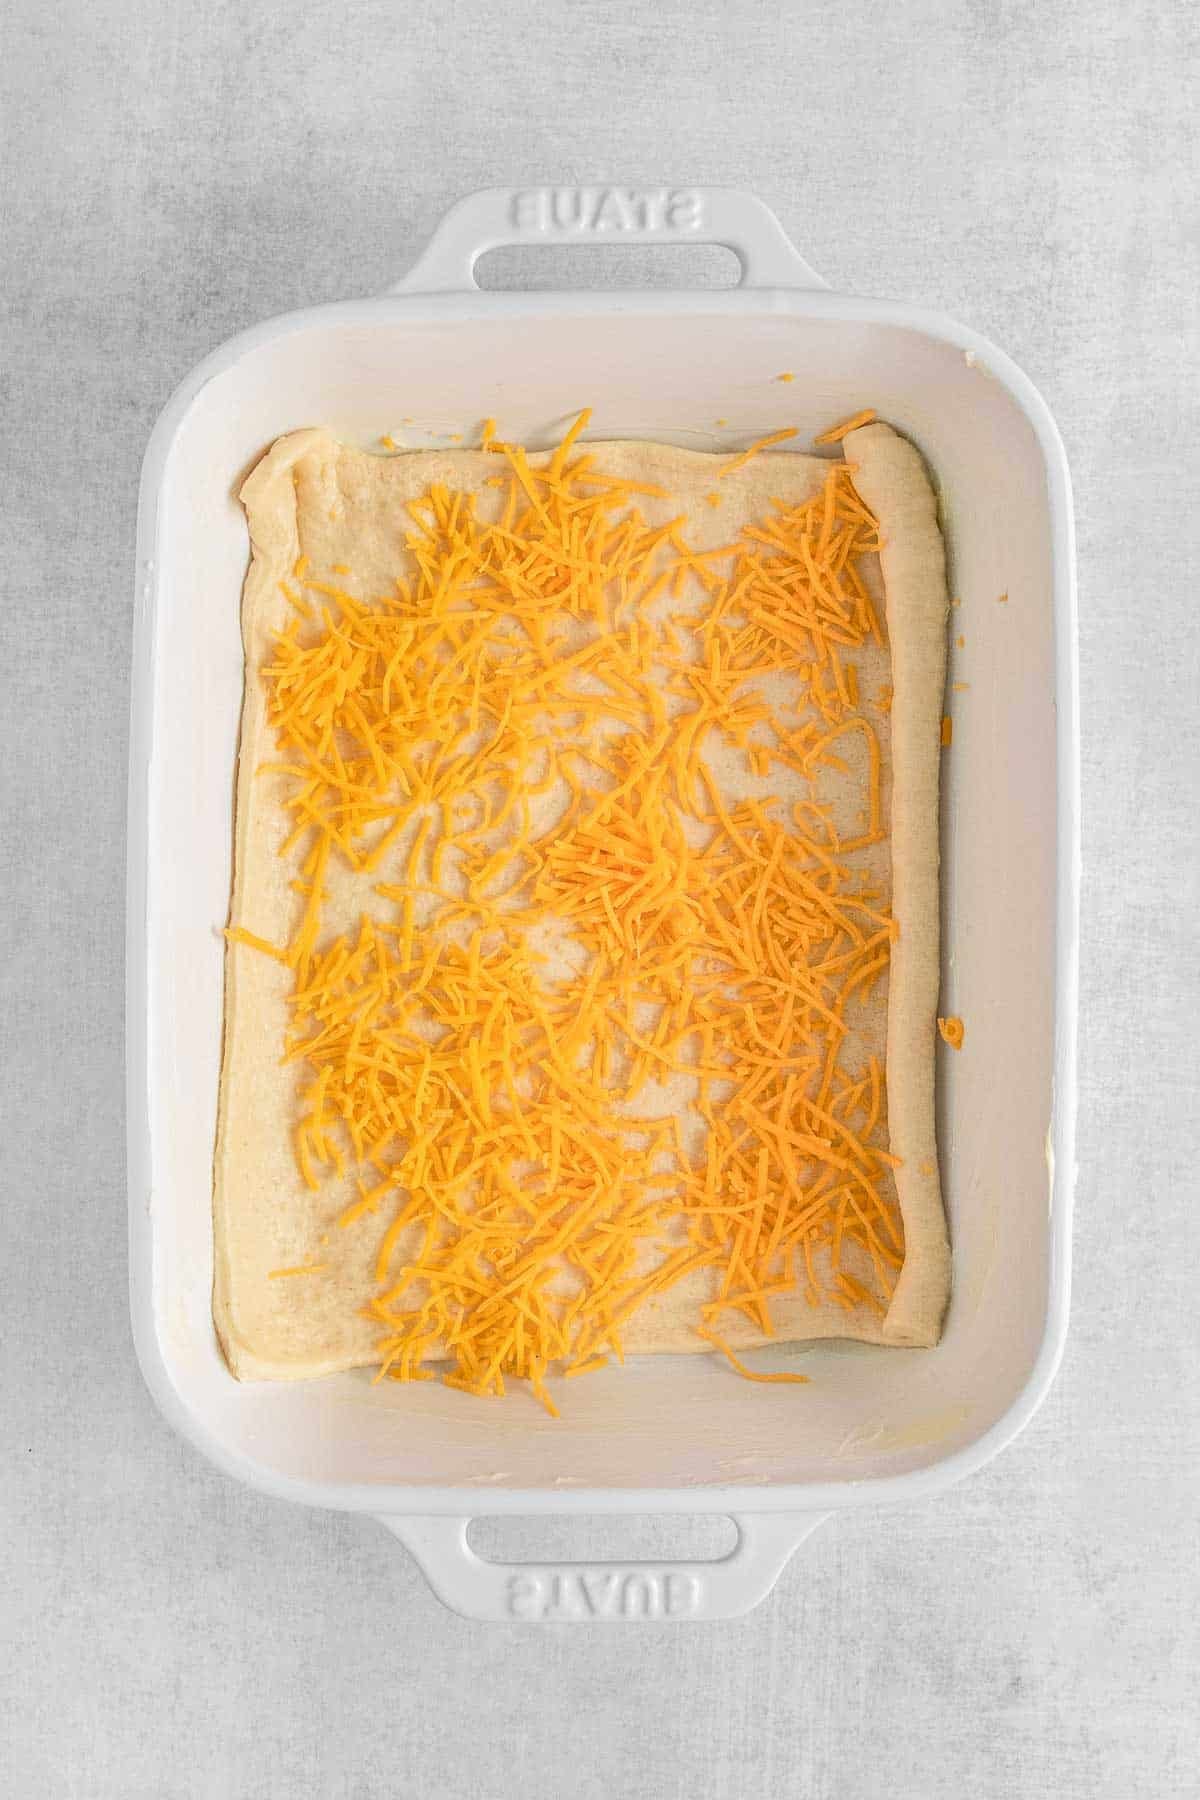 White casserole dish with unbaked crescent roll covered in shredded cheese.